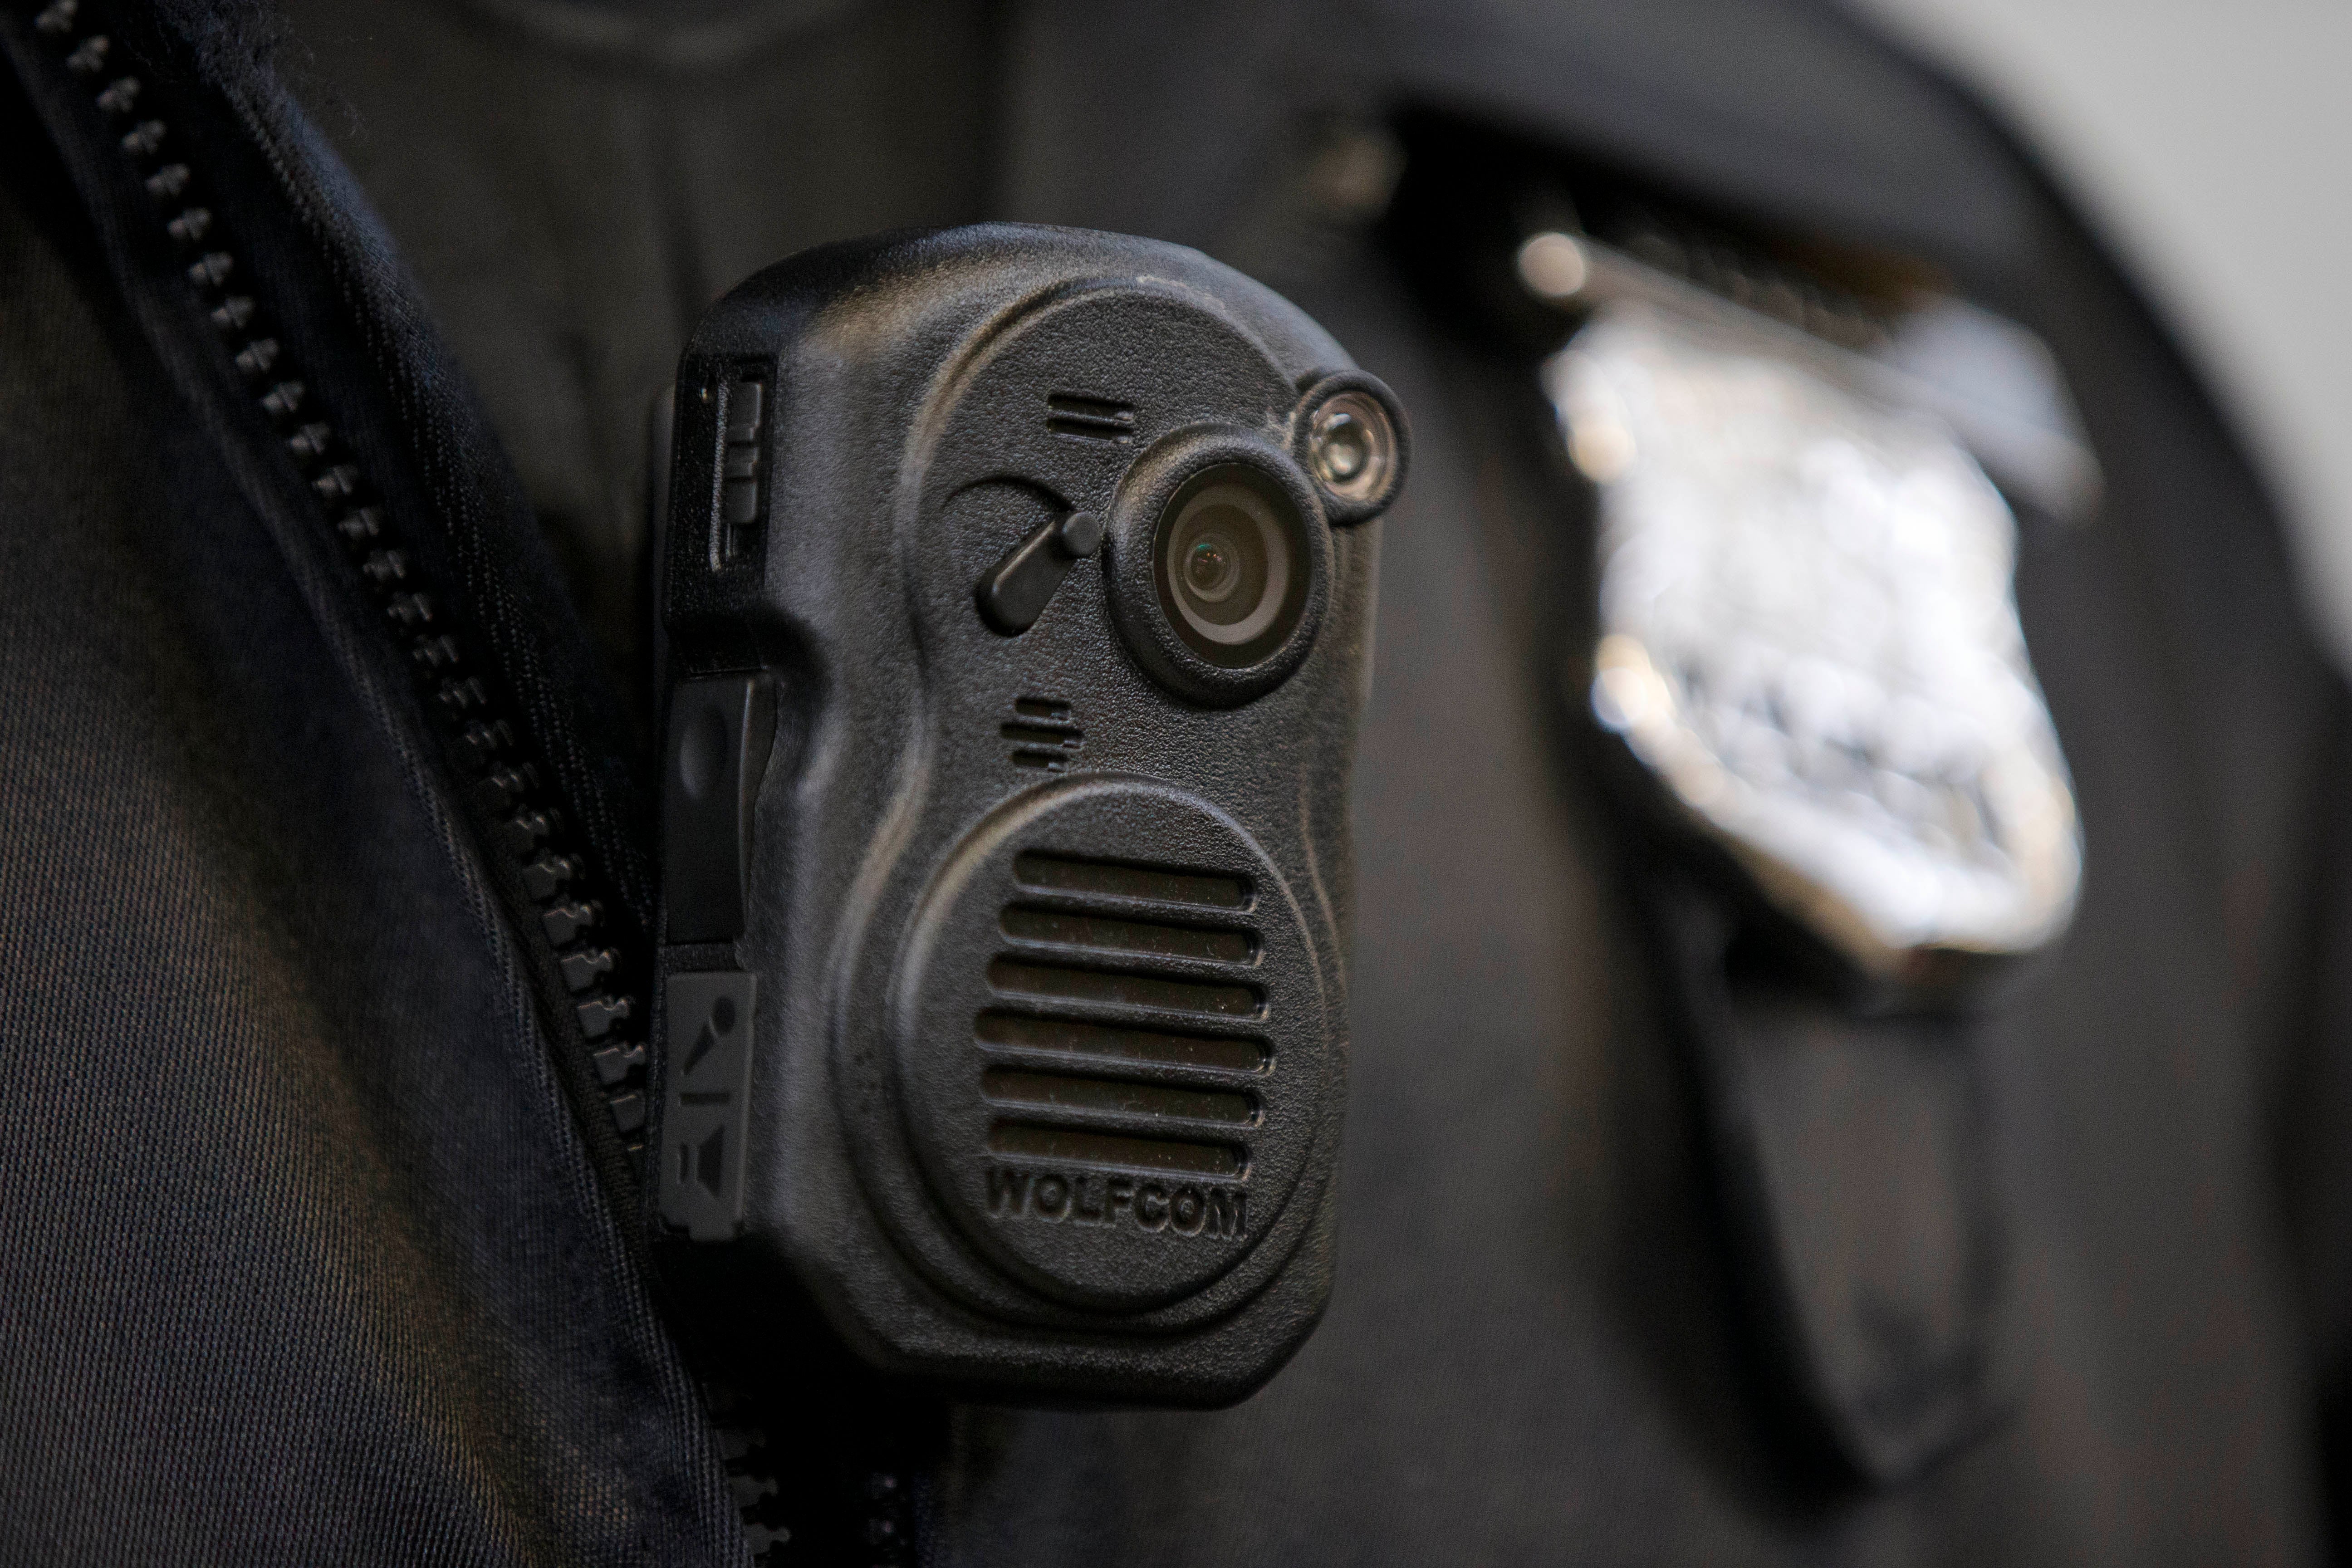 State law allows police to withhold body cam footage